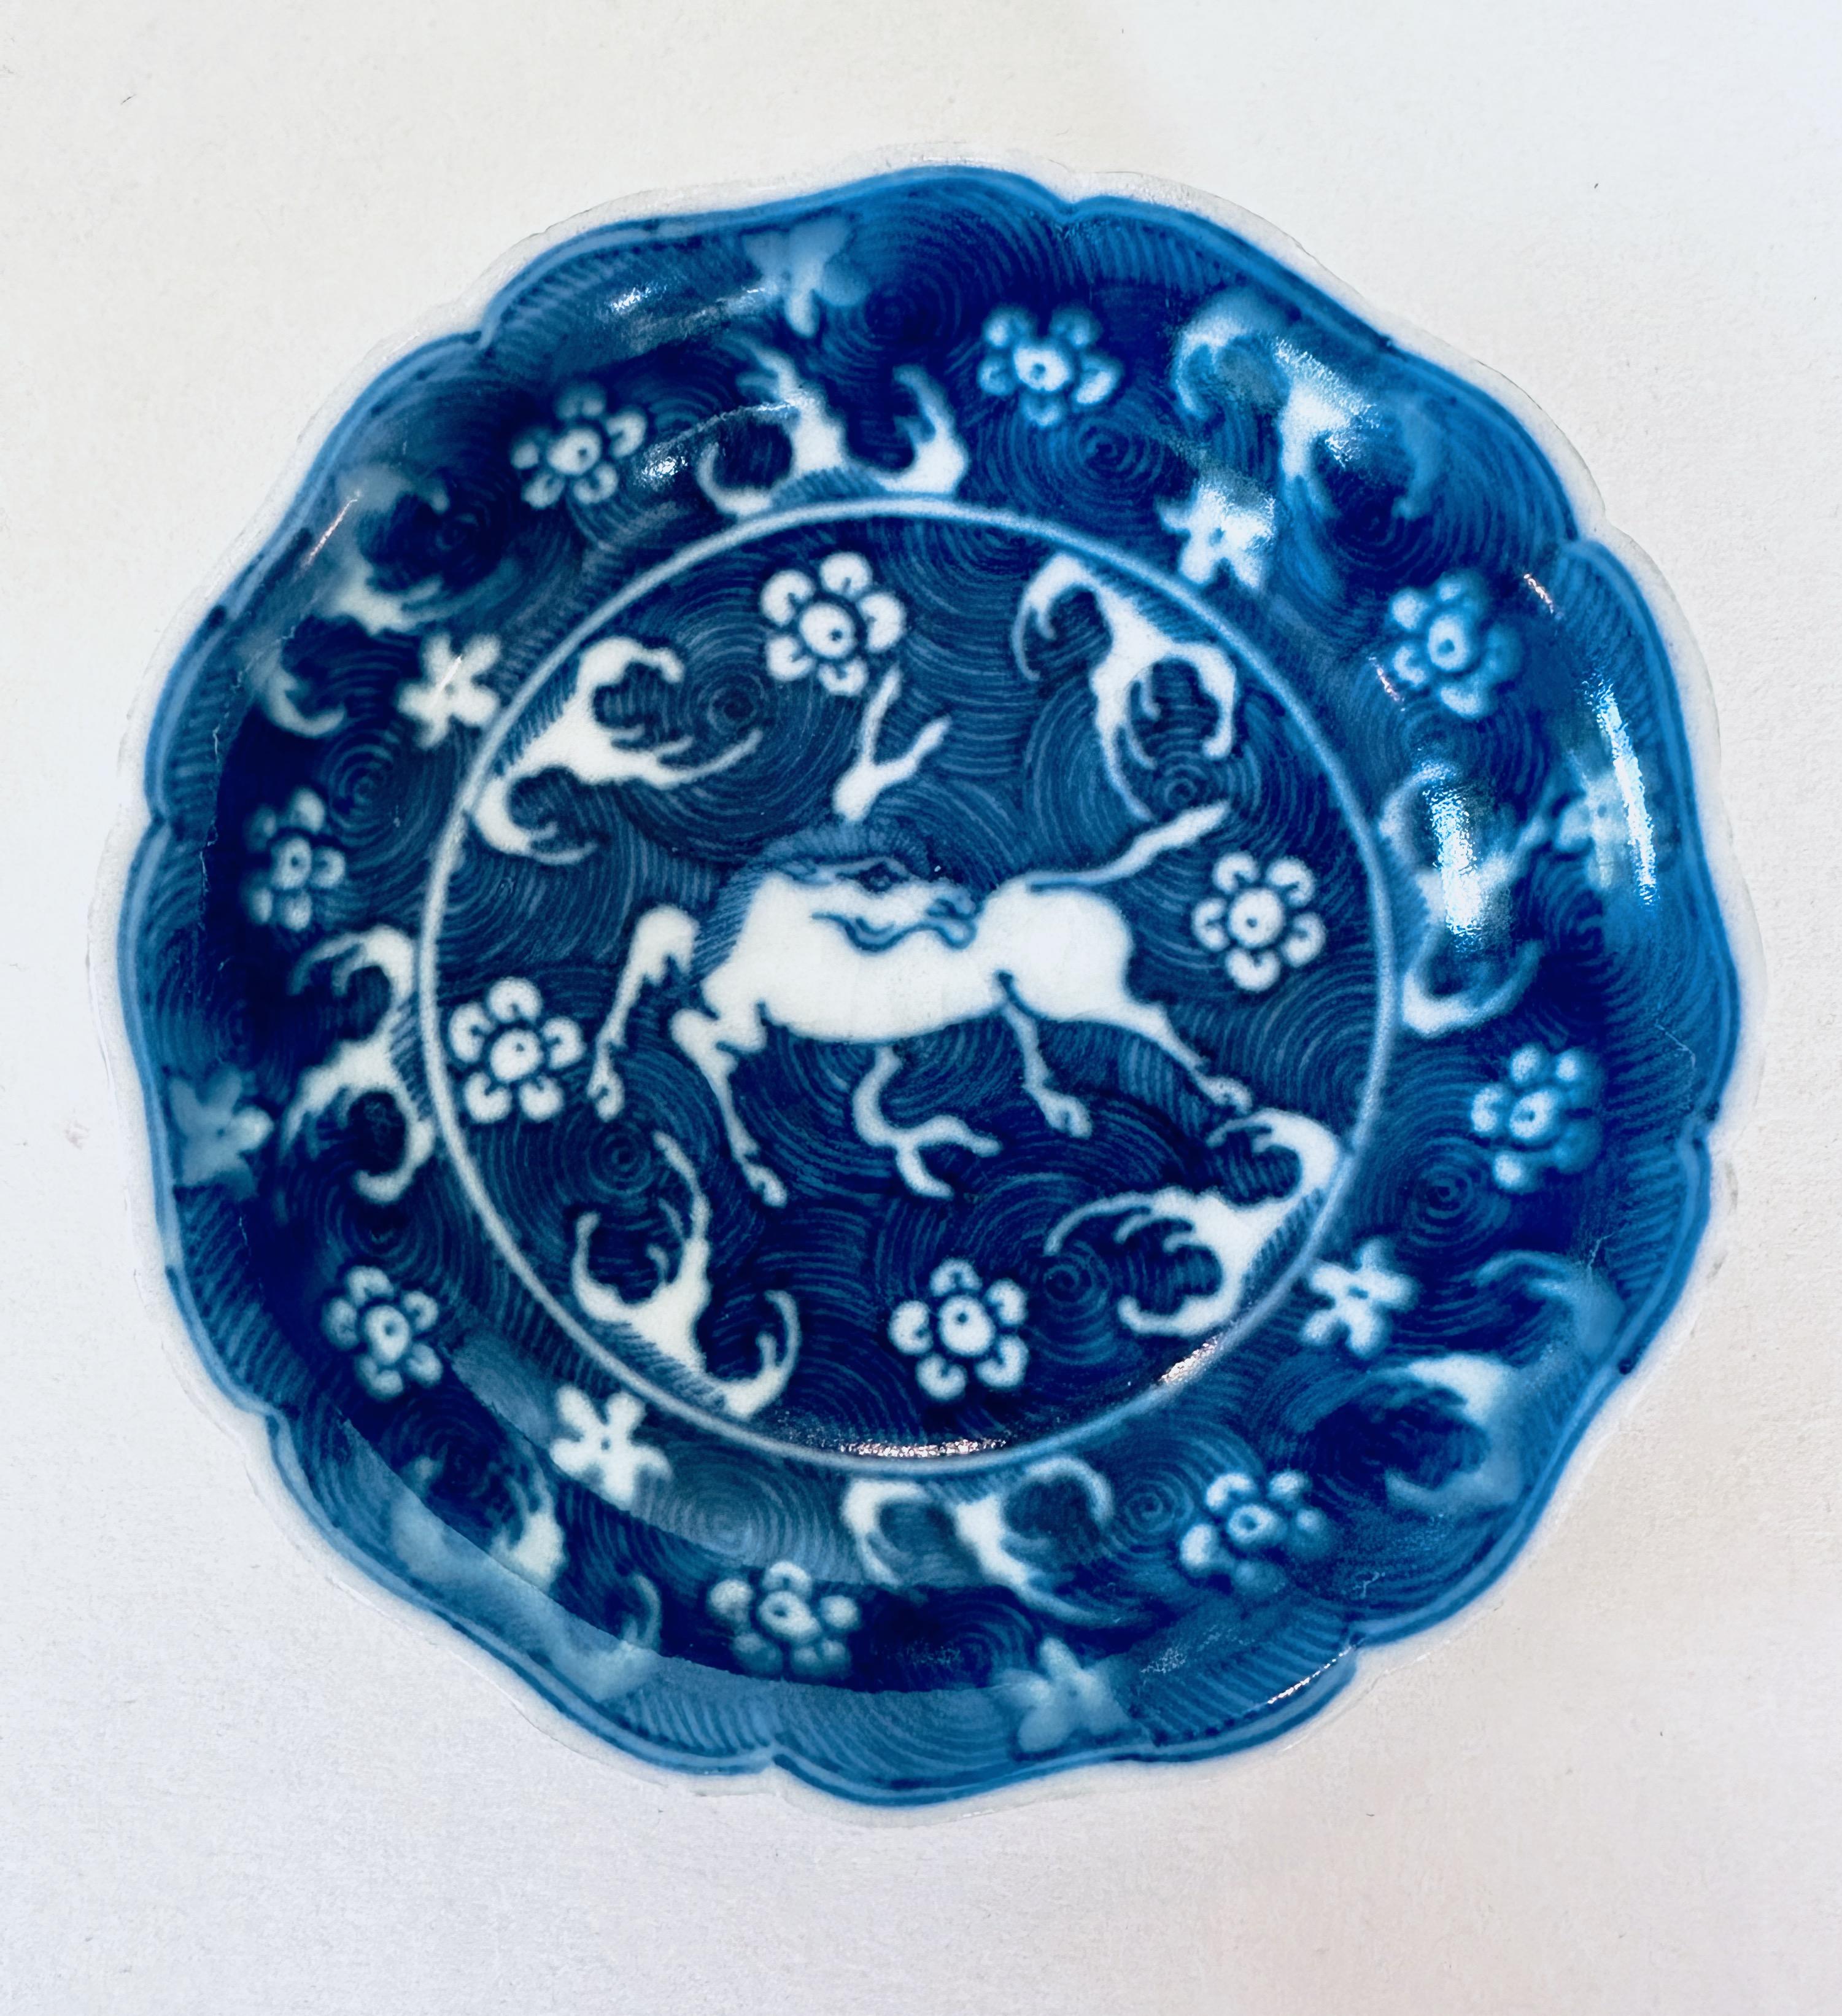 Pair of Dishes decorated with a white horse on a background of blue spirals, 17th century.

These dishes were part of a hoard recovered by Captain Michael Hatcher from the wreck of a ship that sunk in the South China sea in approximately 1643.